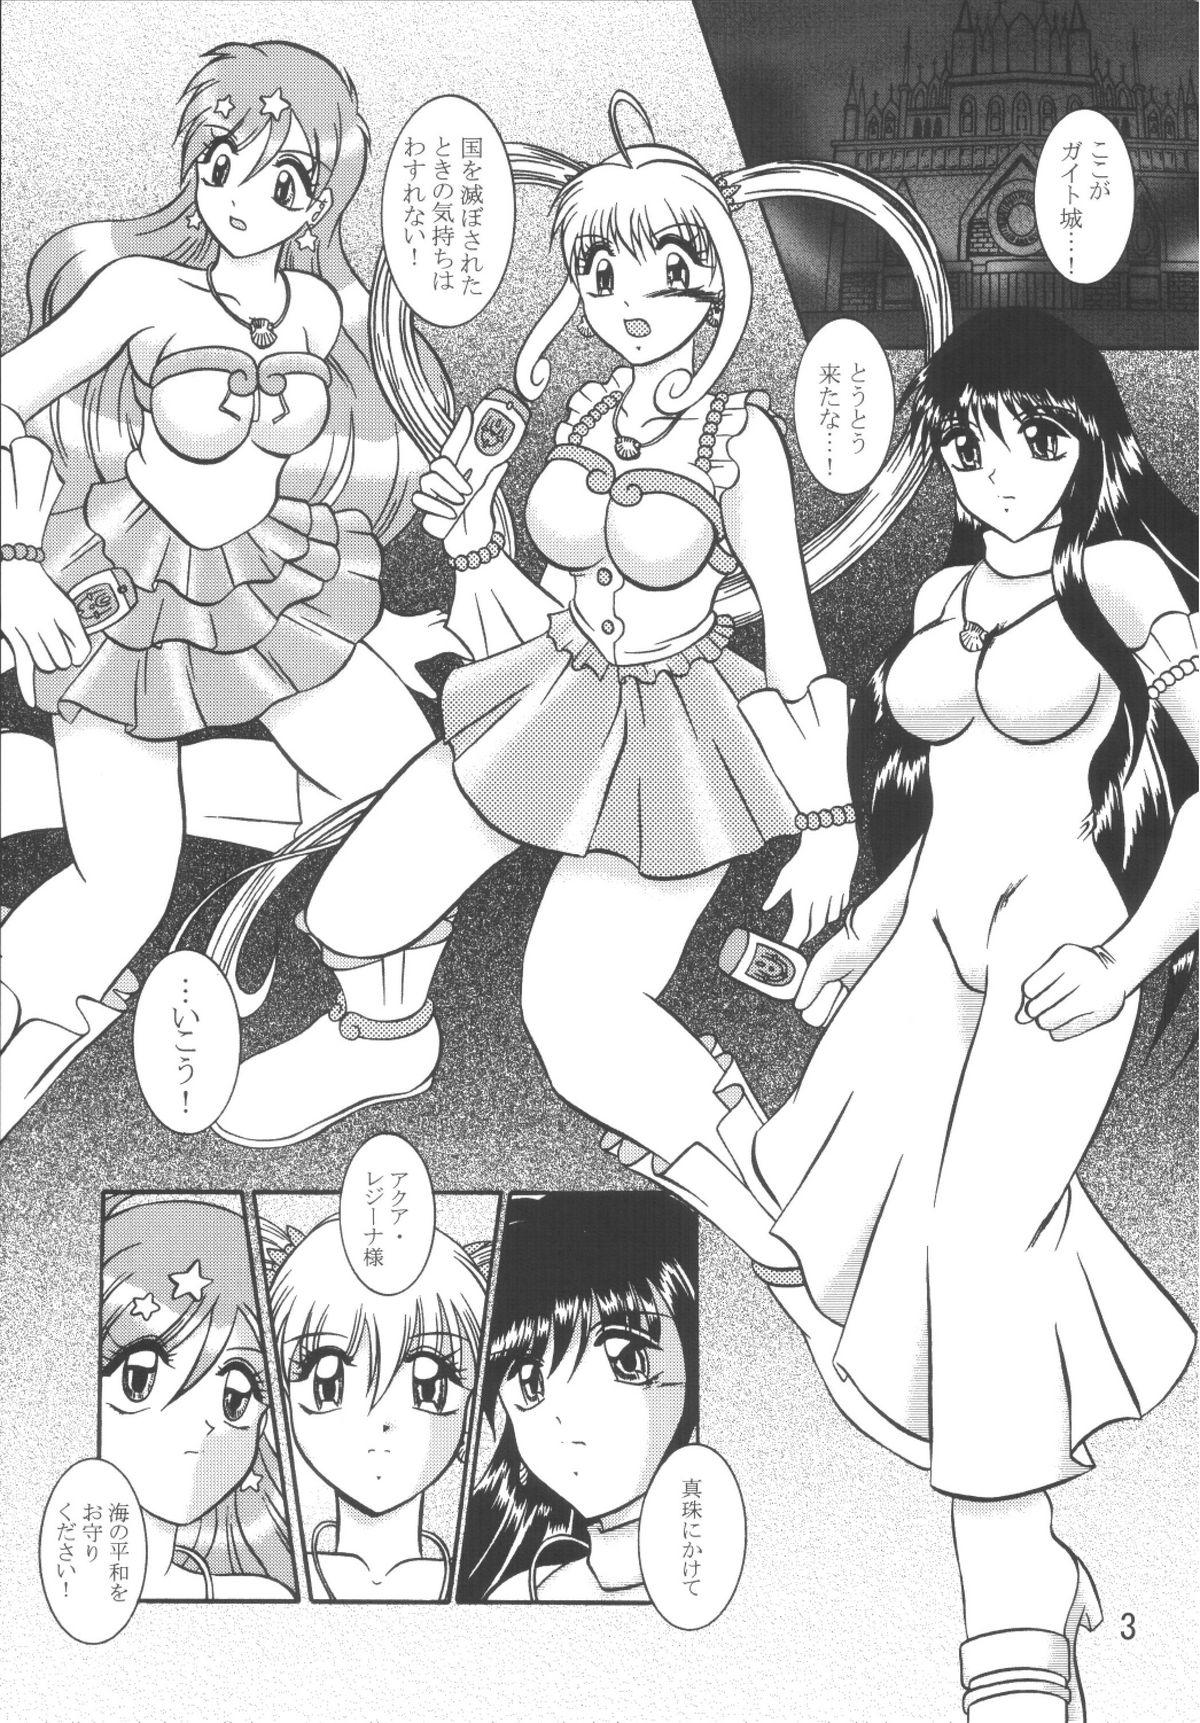 Gay Outinpublic VOICE in the DARK - Mermaid melody pichi pichi pitch Hardcore Free Porn - Page 3